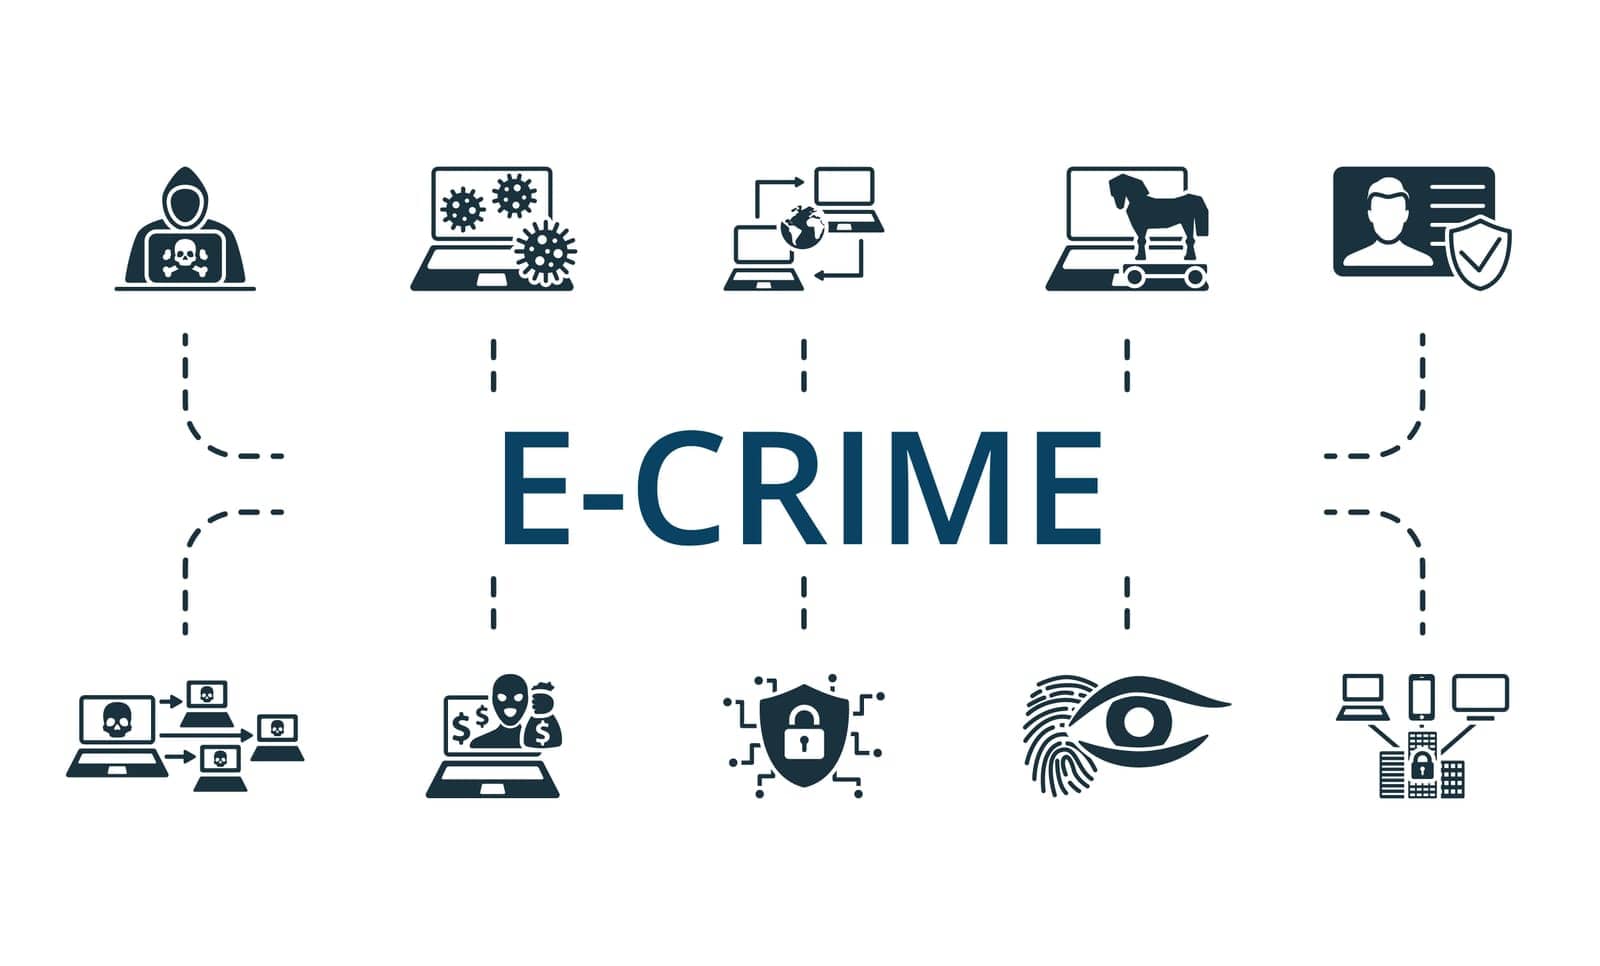 E-crime set. Creative icons: hacker, virus, remote access, trojan horse, authentication, botnet, online robbery, cyber protector, biometric, critical infrastructure. by simakovavector